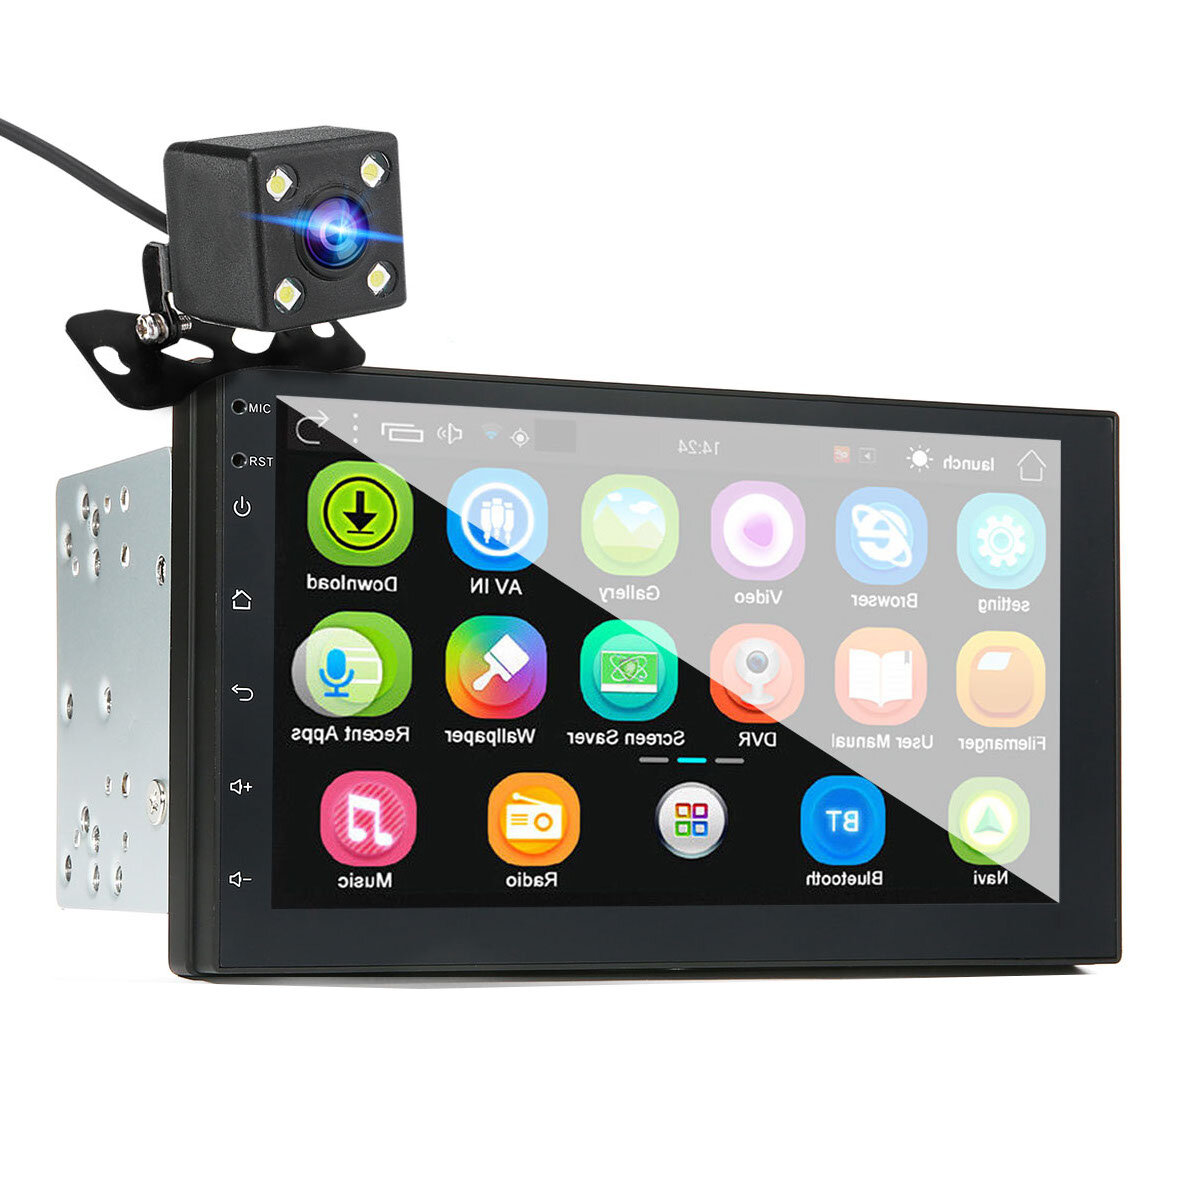 7/" Android 8.0 2Din Car Radio Audio Stereo Multimedia GPS Navigation MP5 Player~